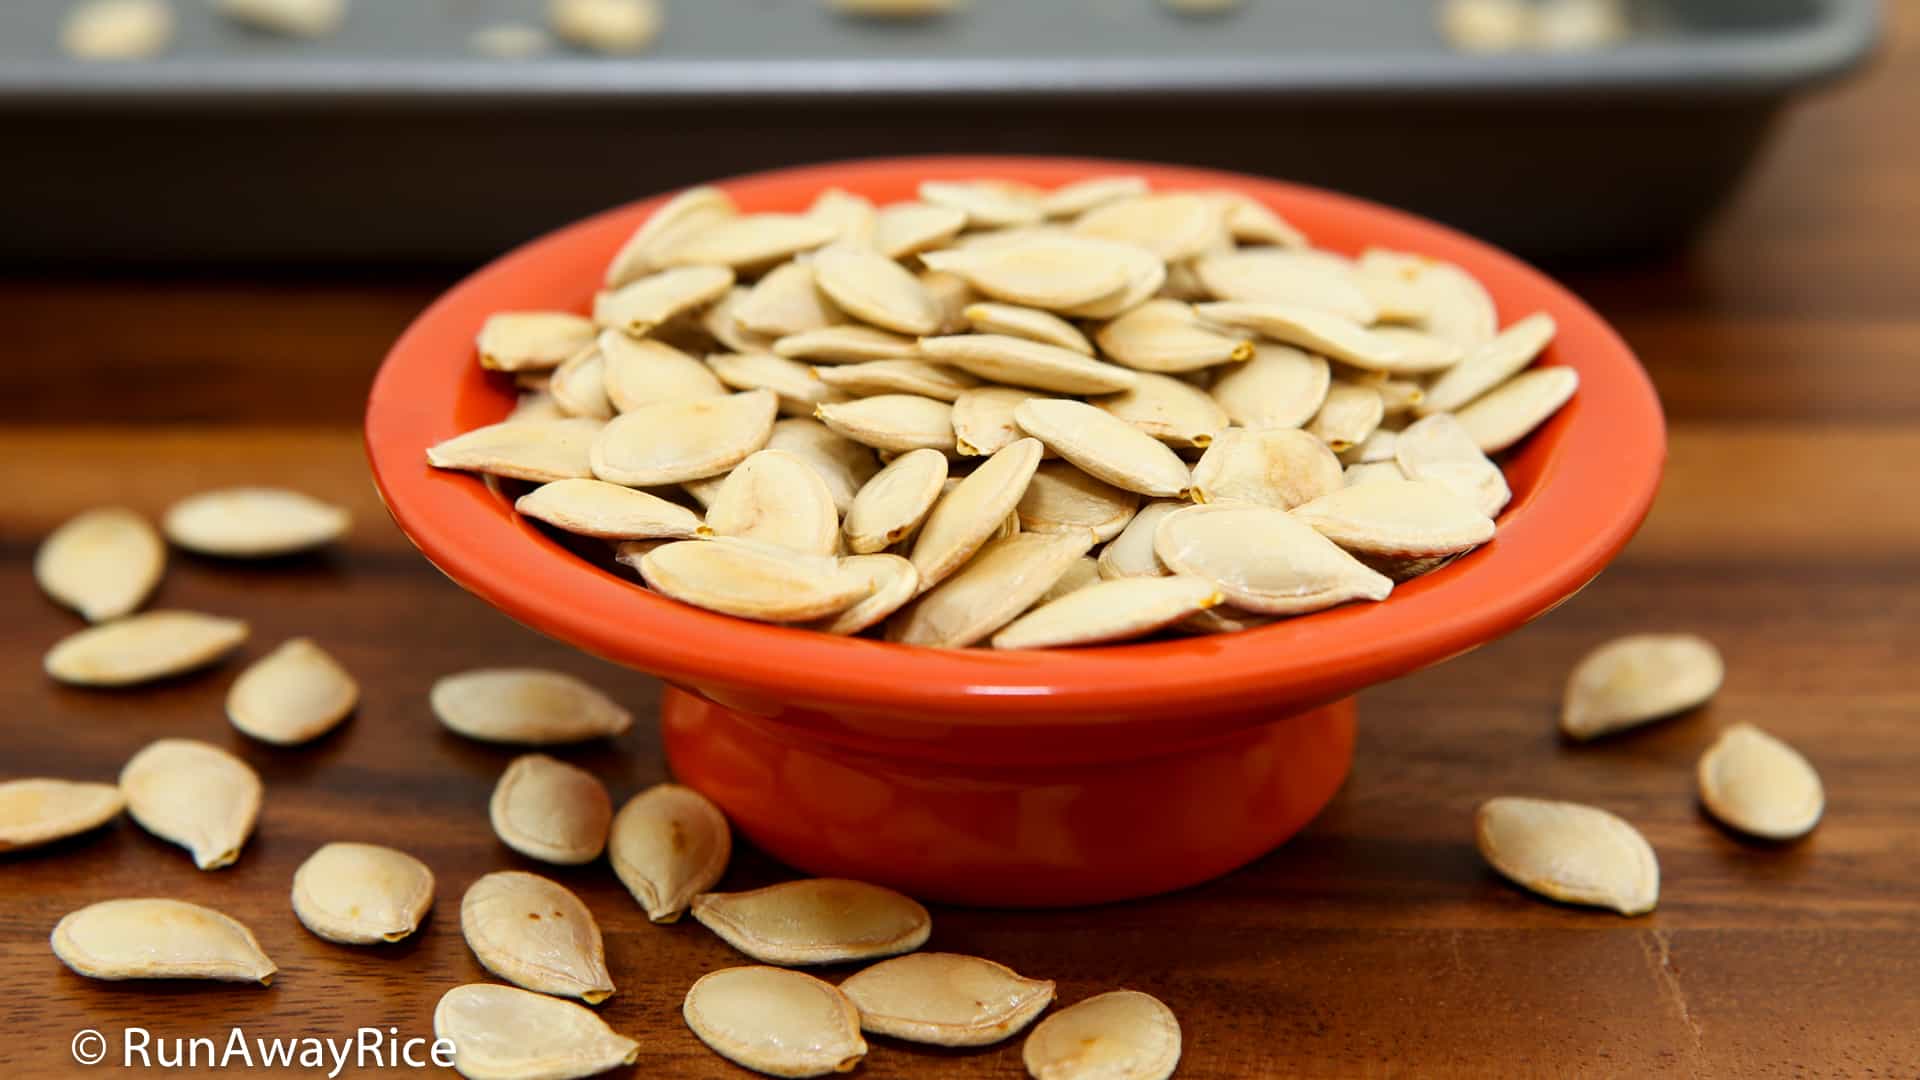 How to Roast Pumpkin Seeds - Easy Step-by-Step Instructions with Pics